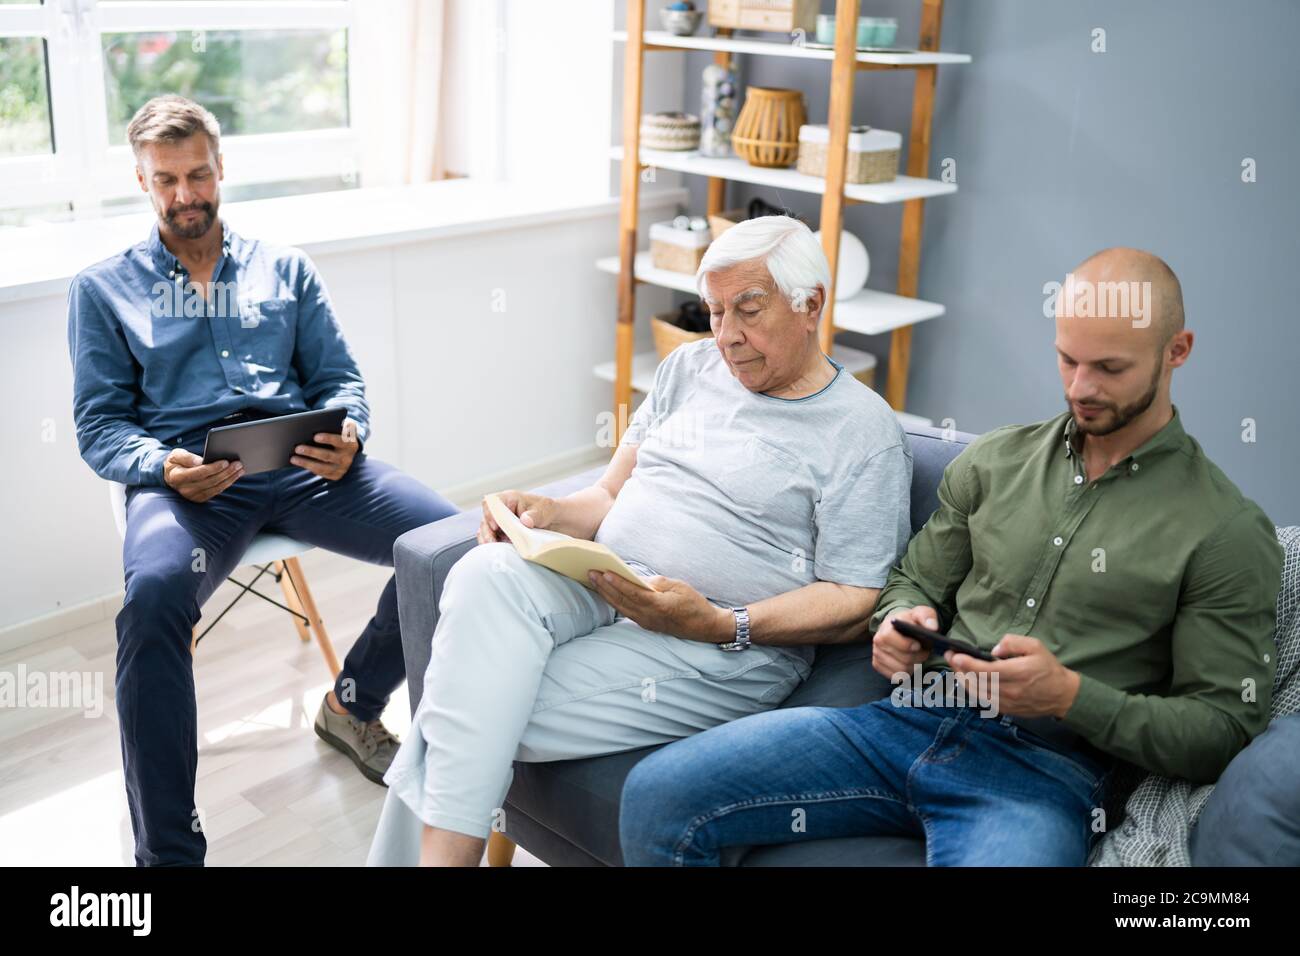 Three Generation Men Spending Time Together At Home Stock Photo